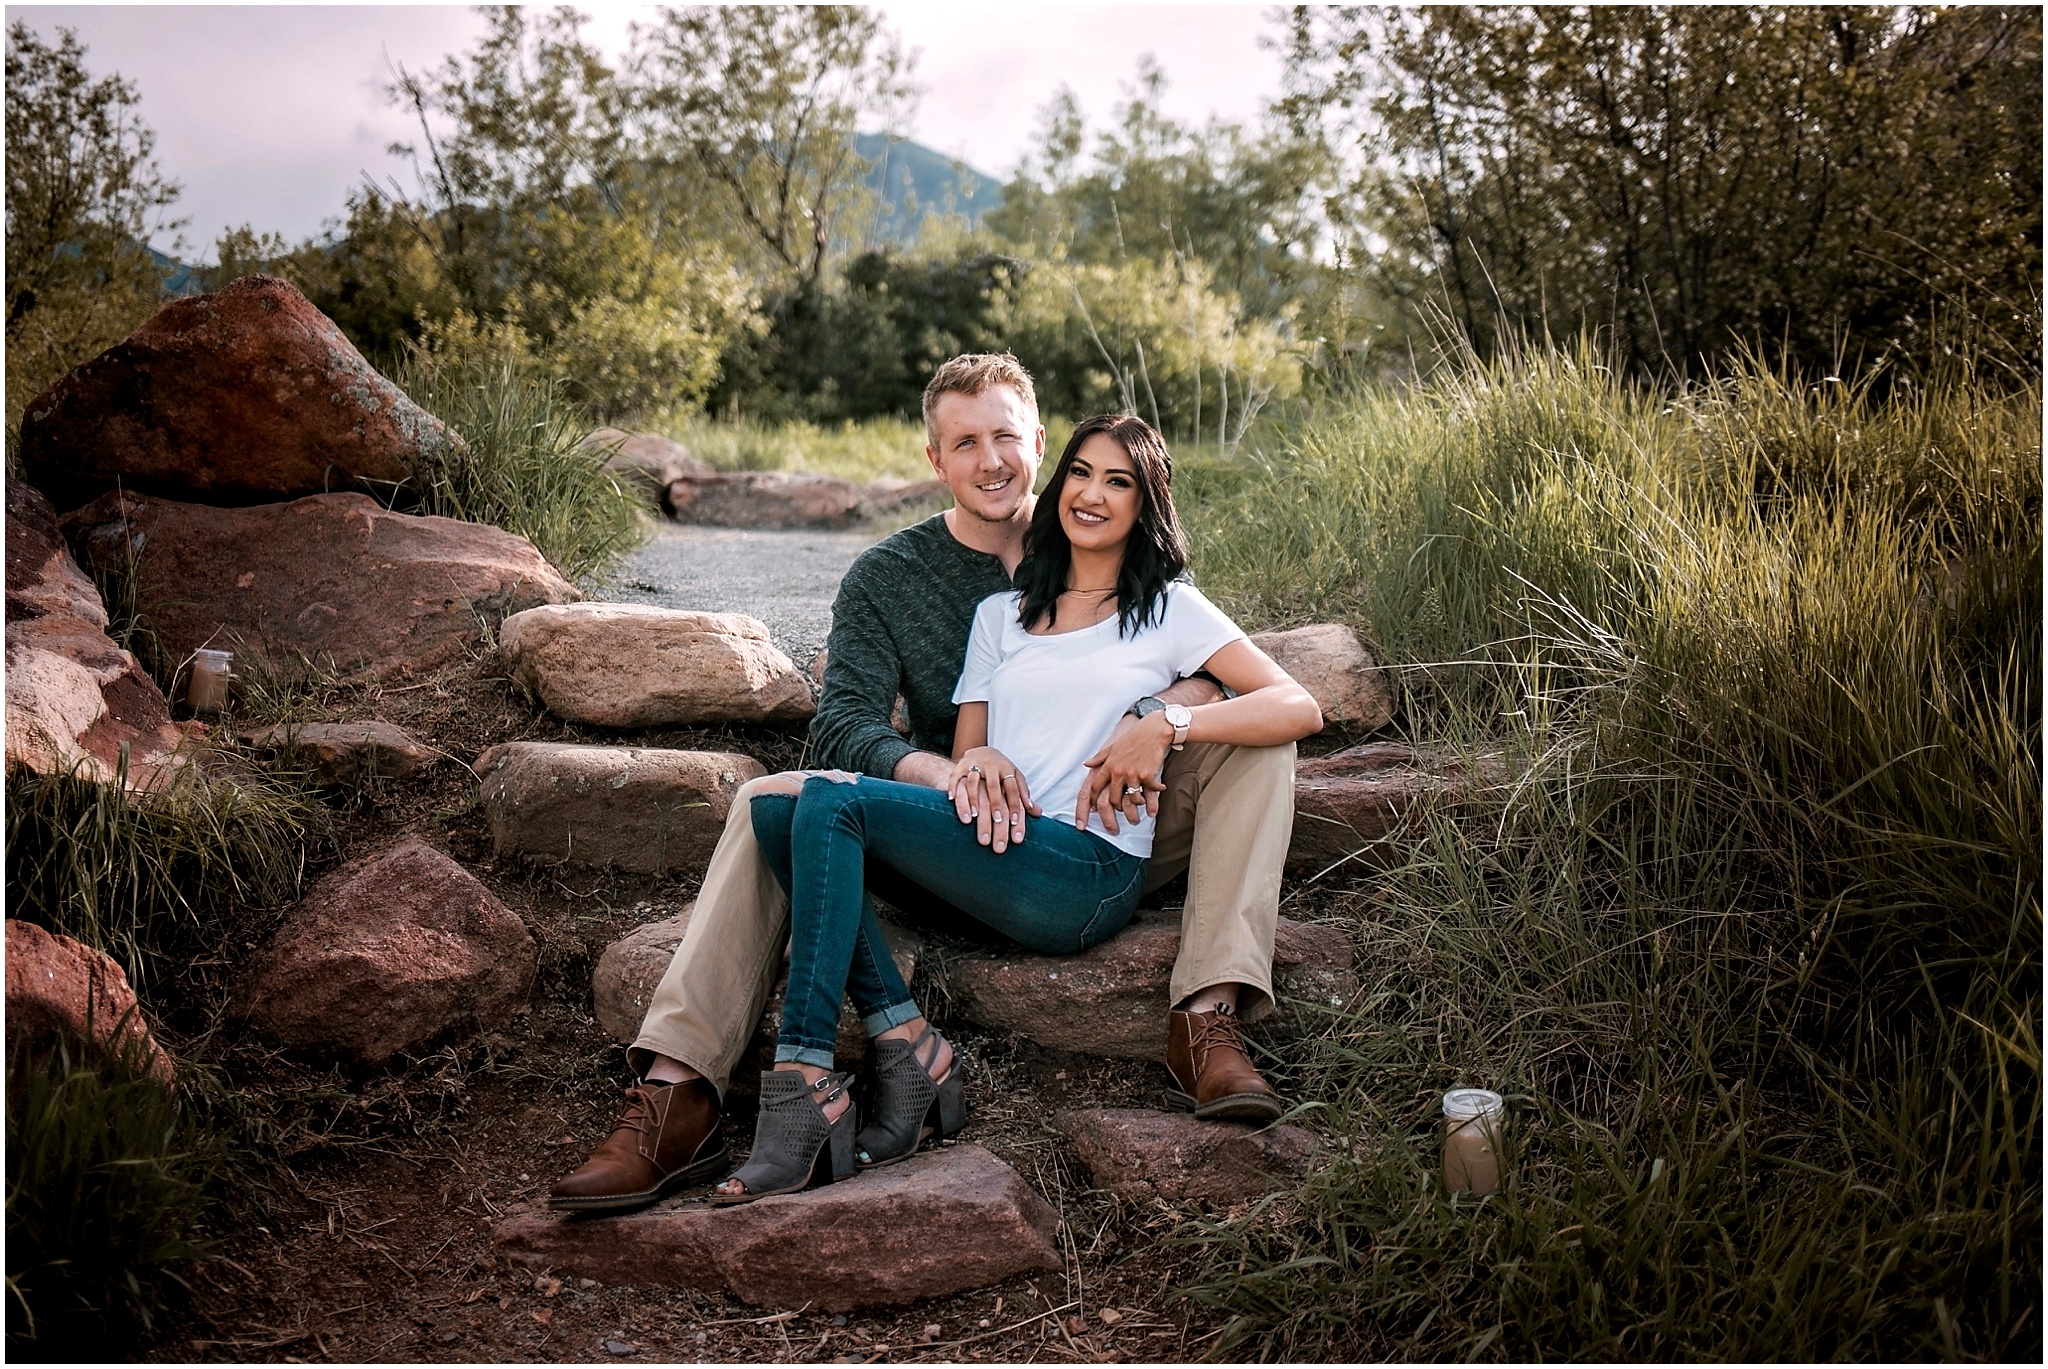 boulder, colorado, co, engagement, photographer, photos, candid, unposed, real, love, bride, groom, laughing, engaged, twirling, passionate, destination, elopement, rocky mountains, fun